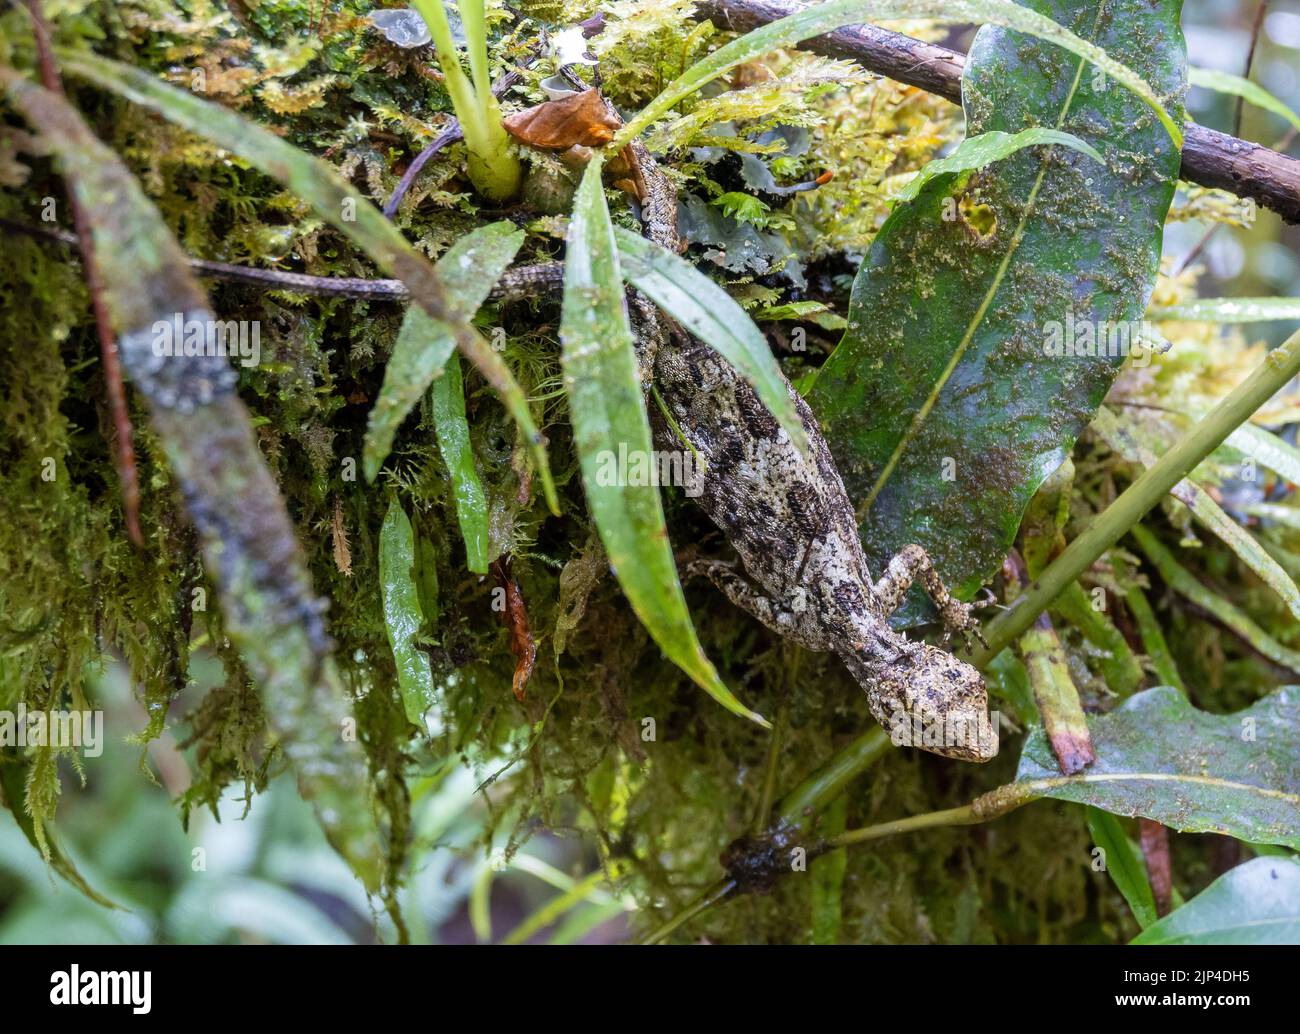 Sulawesi Lined Gliding Lizard (Draco spilonotus) on a mossy branch. Lore Lindu National Park, Sulawesi, Indonesia. Stock Photo